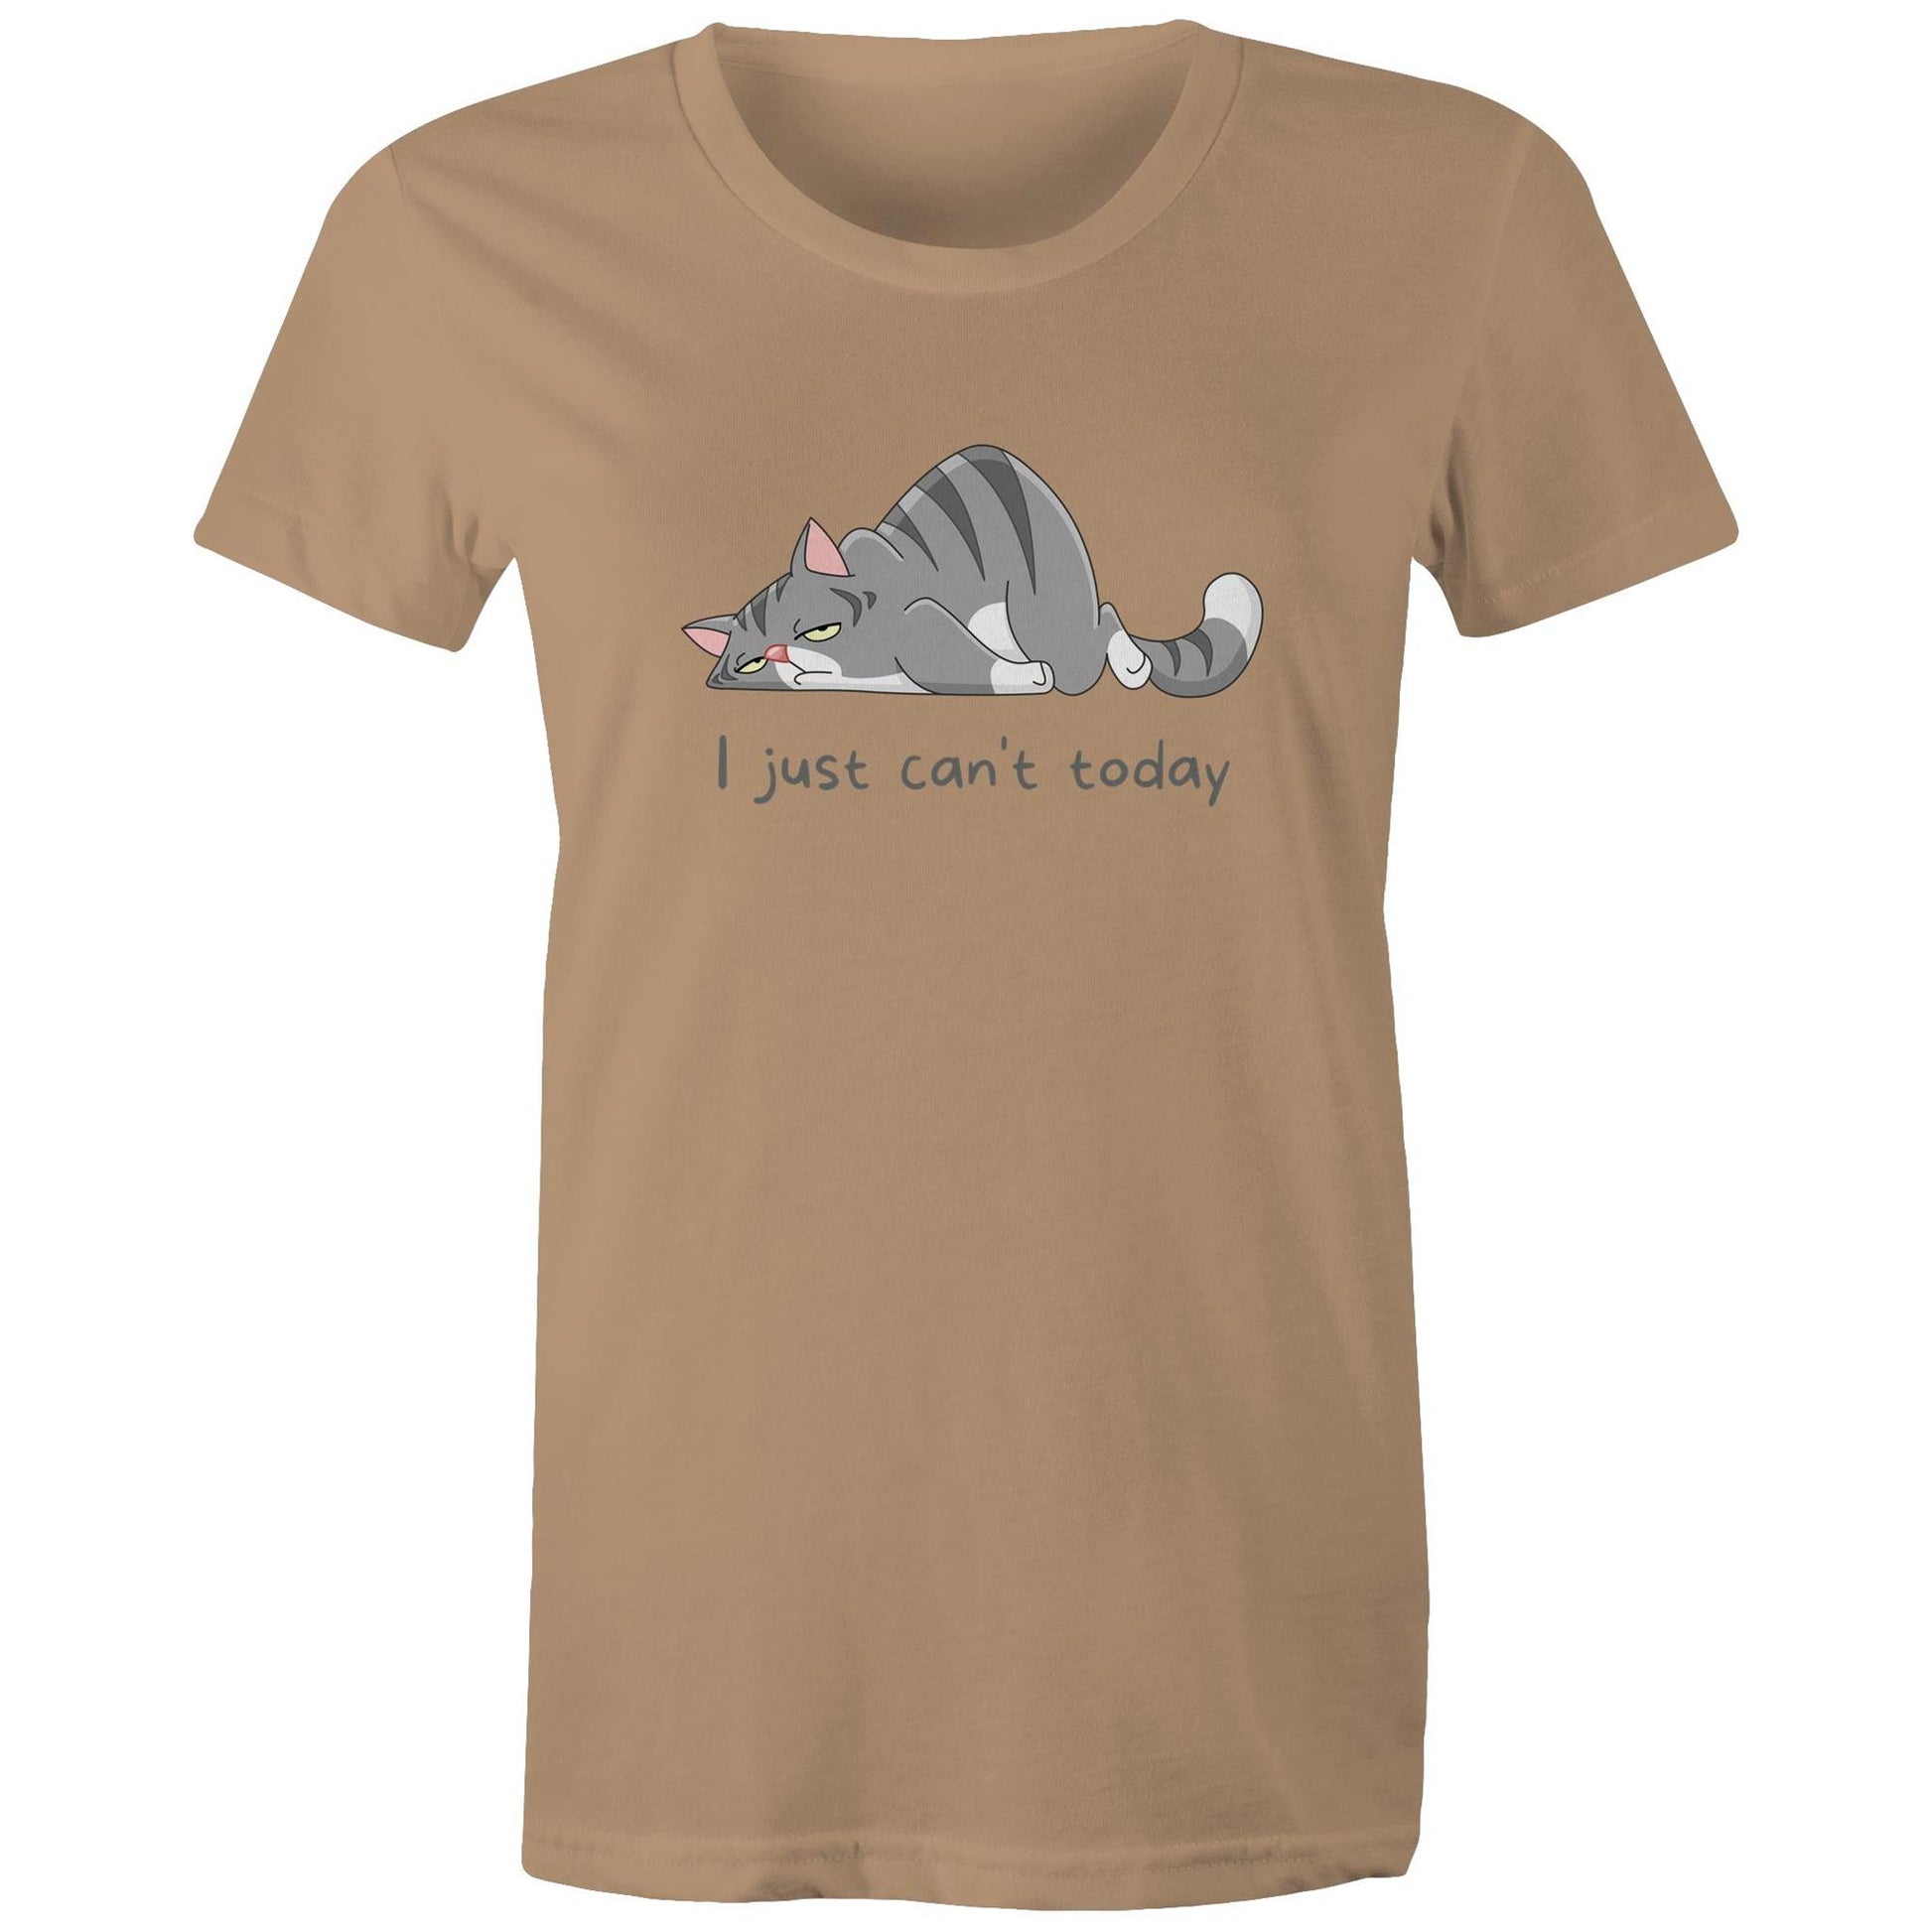 Cat, I Just Can't Today - Womens T-shirt Tan Womens T-shirt animal